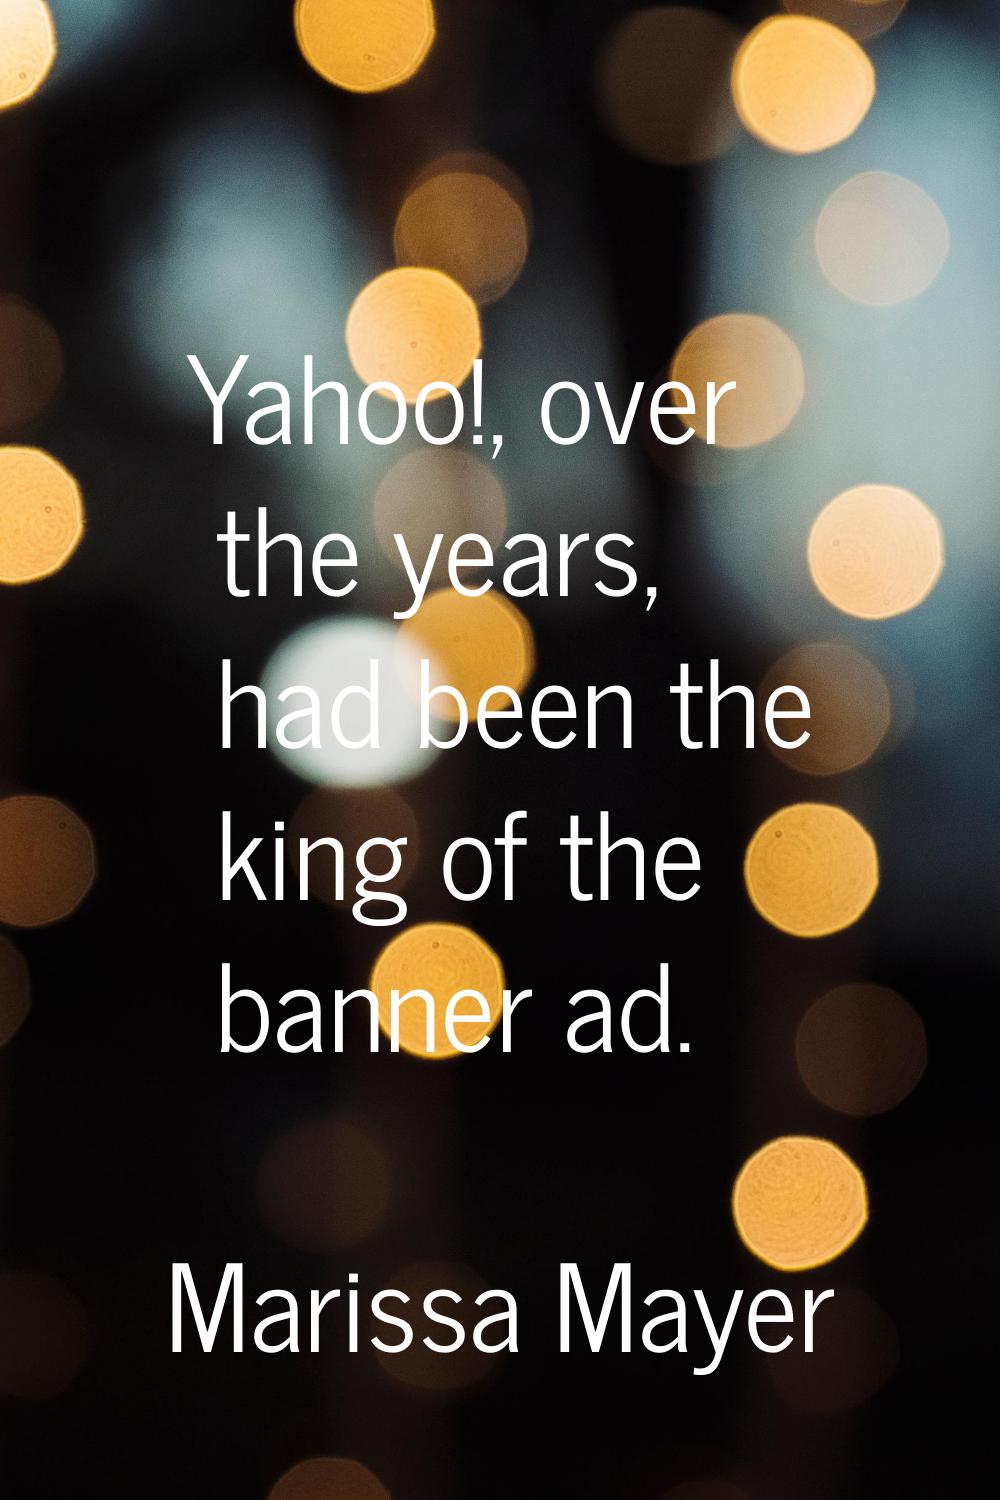 Yahoo!, over the years, had been the king of the banner ad.